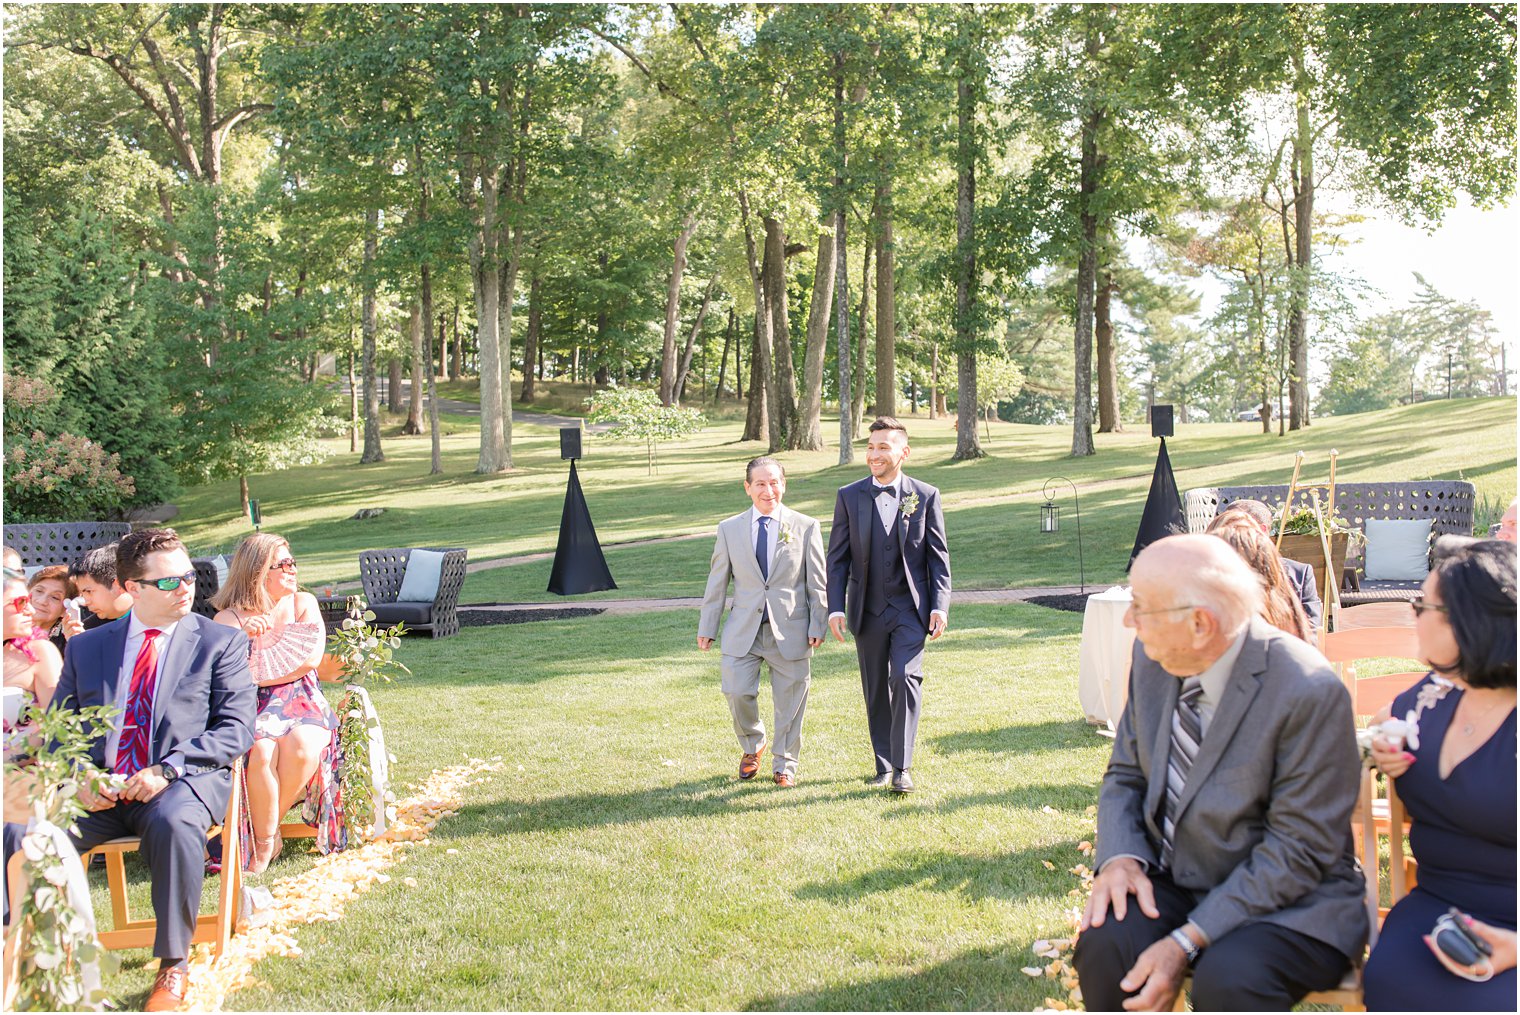 Groom processing during ceremony | Outdoor wedding ceremony at Ninety Acres at Natirar in Peapack NJ